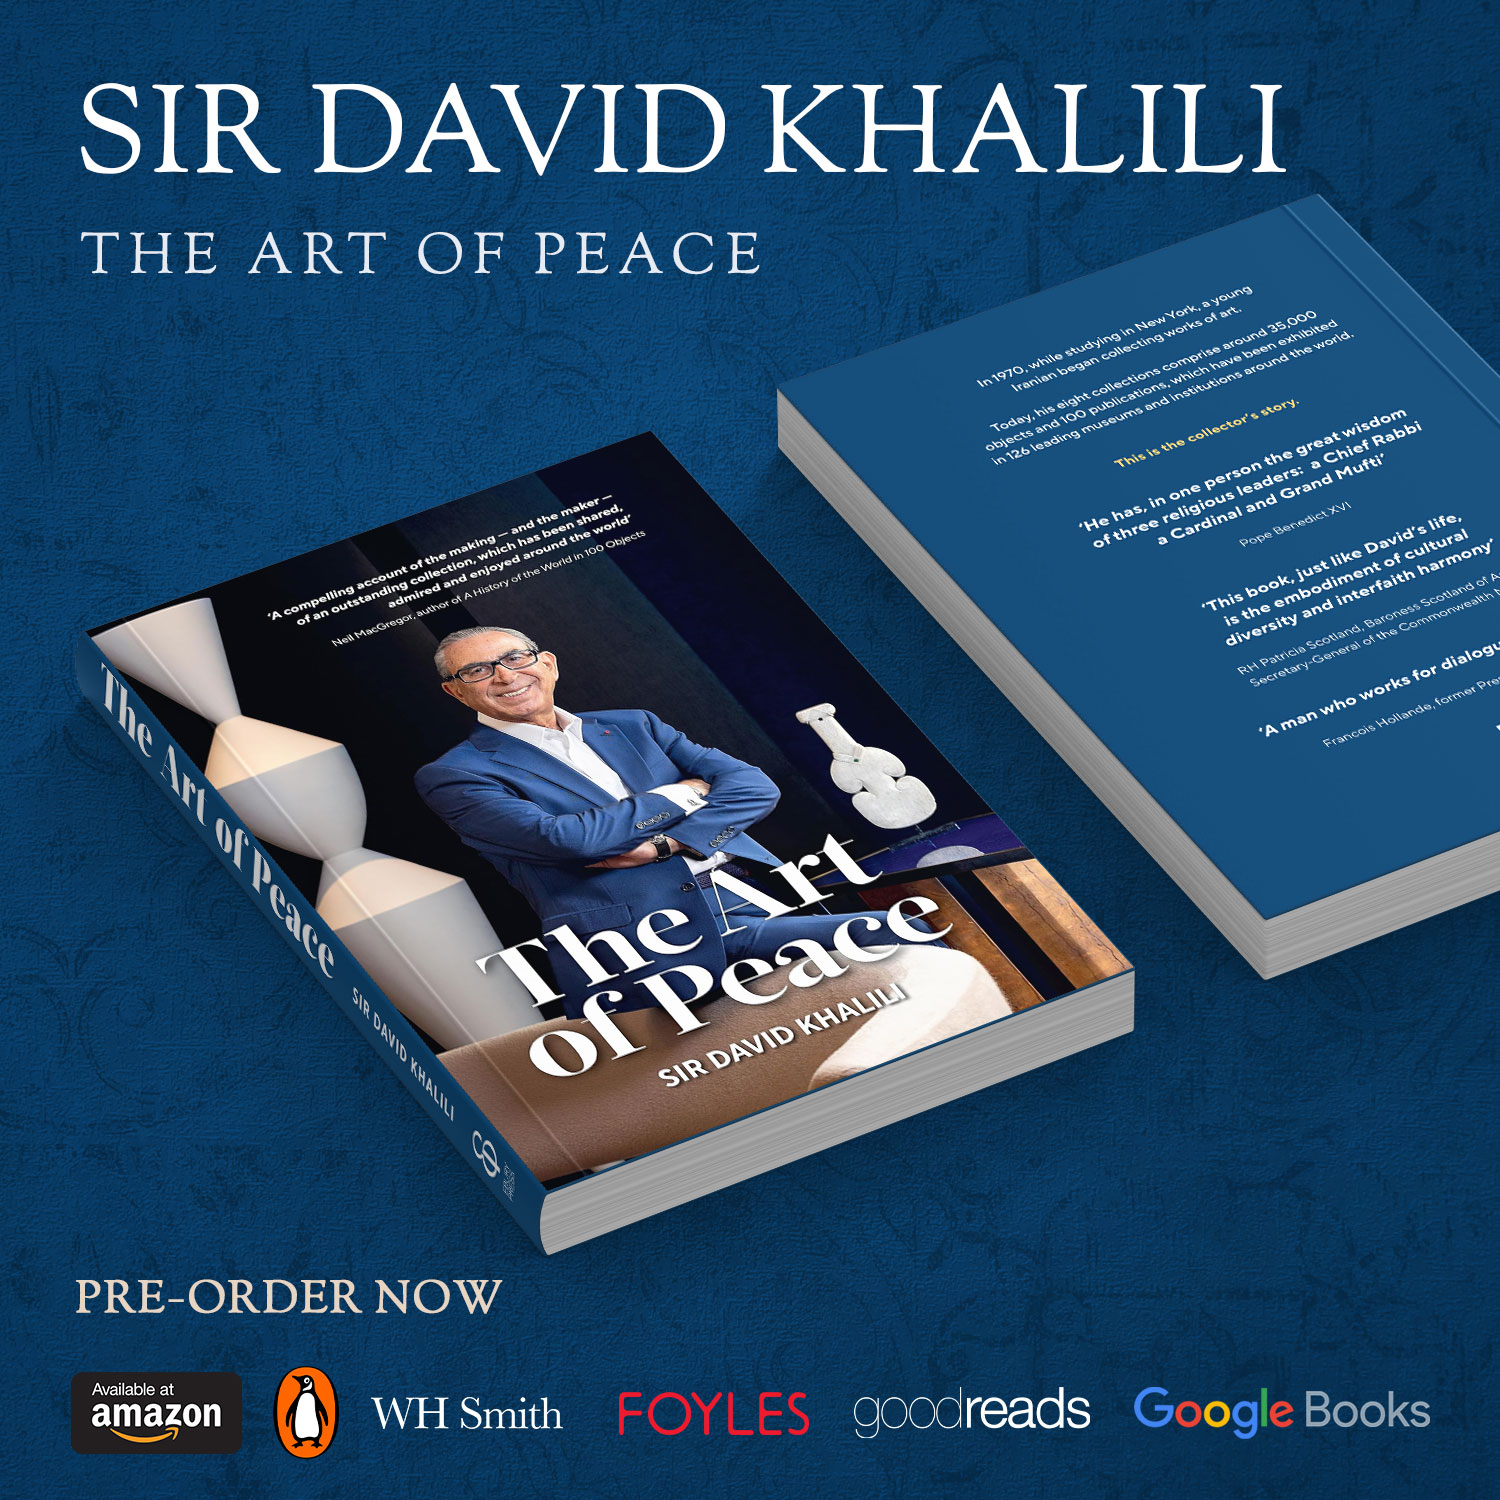 Buy Now: Sir David Khalili’s “The Art of Peace” Set for November 2nd Release